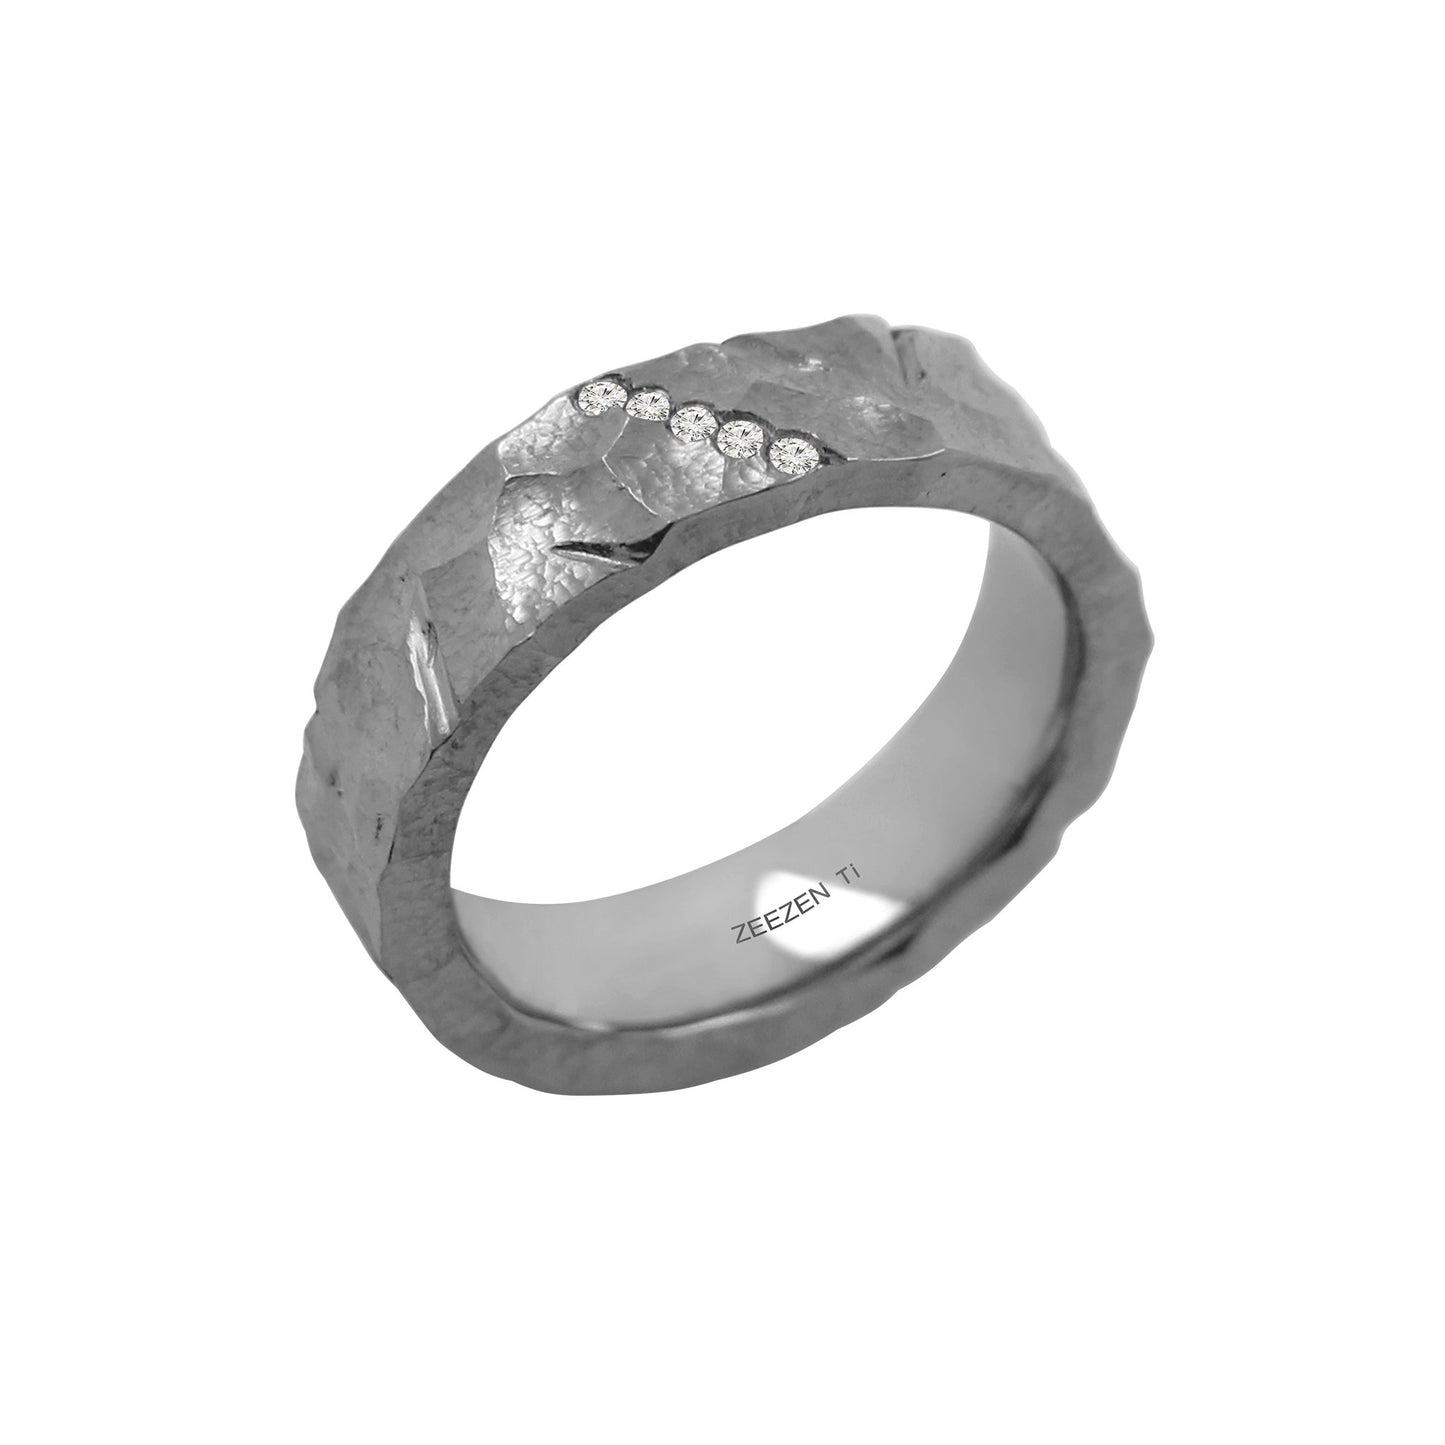 Tantalum Ring w/ Lab Diamond(5x0.01 White TW/Si-2) Boundary/Polished(Cut). Tantalum ring with five lab grown diamonds going down diagonally from left to right in the center of the ring. Ring profile: width: 6.0 mm || height: 2.5 mm. Side view.